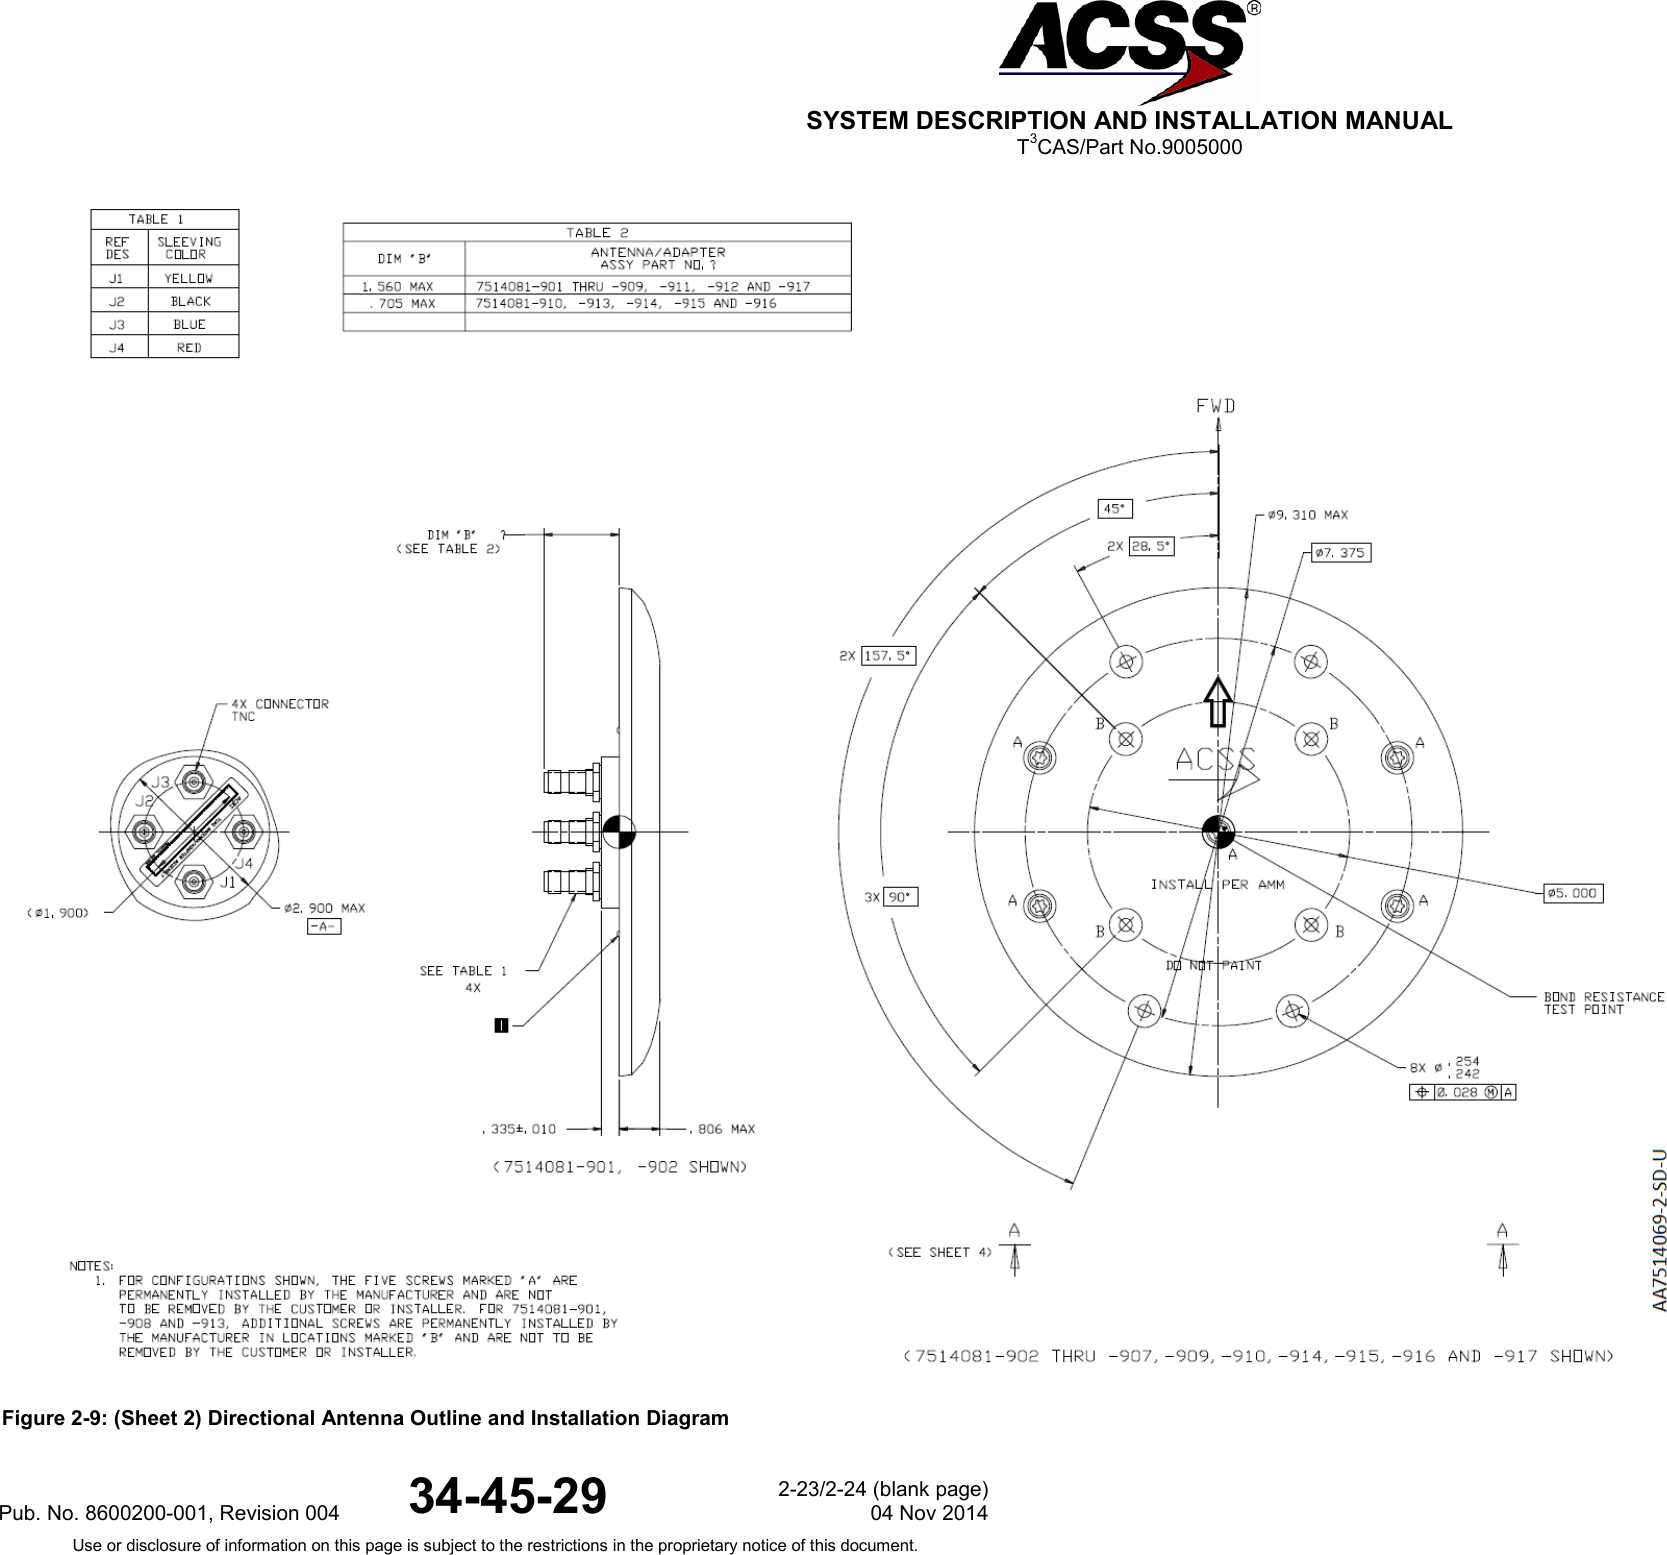  SYSTEM DESCRIPTION AND INSTALLATION MANUAL T3CAS/Part No.9005000  Figure 2-9: (Sheet 2) Directional Antenna Outline and Installation Diagram Pub. No. 8600200-001, Revision 004 34-45-29 2-23/2-24 (blank page) 04 Nov 2014 Use or disclosure of information on this page is subject to the restrictions in the proprietary notice of this document.  